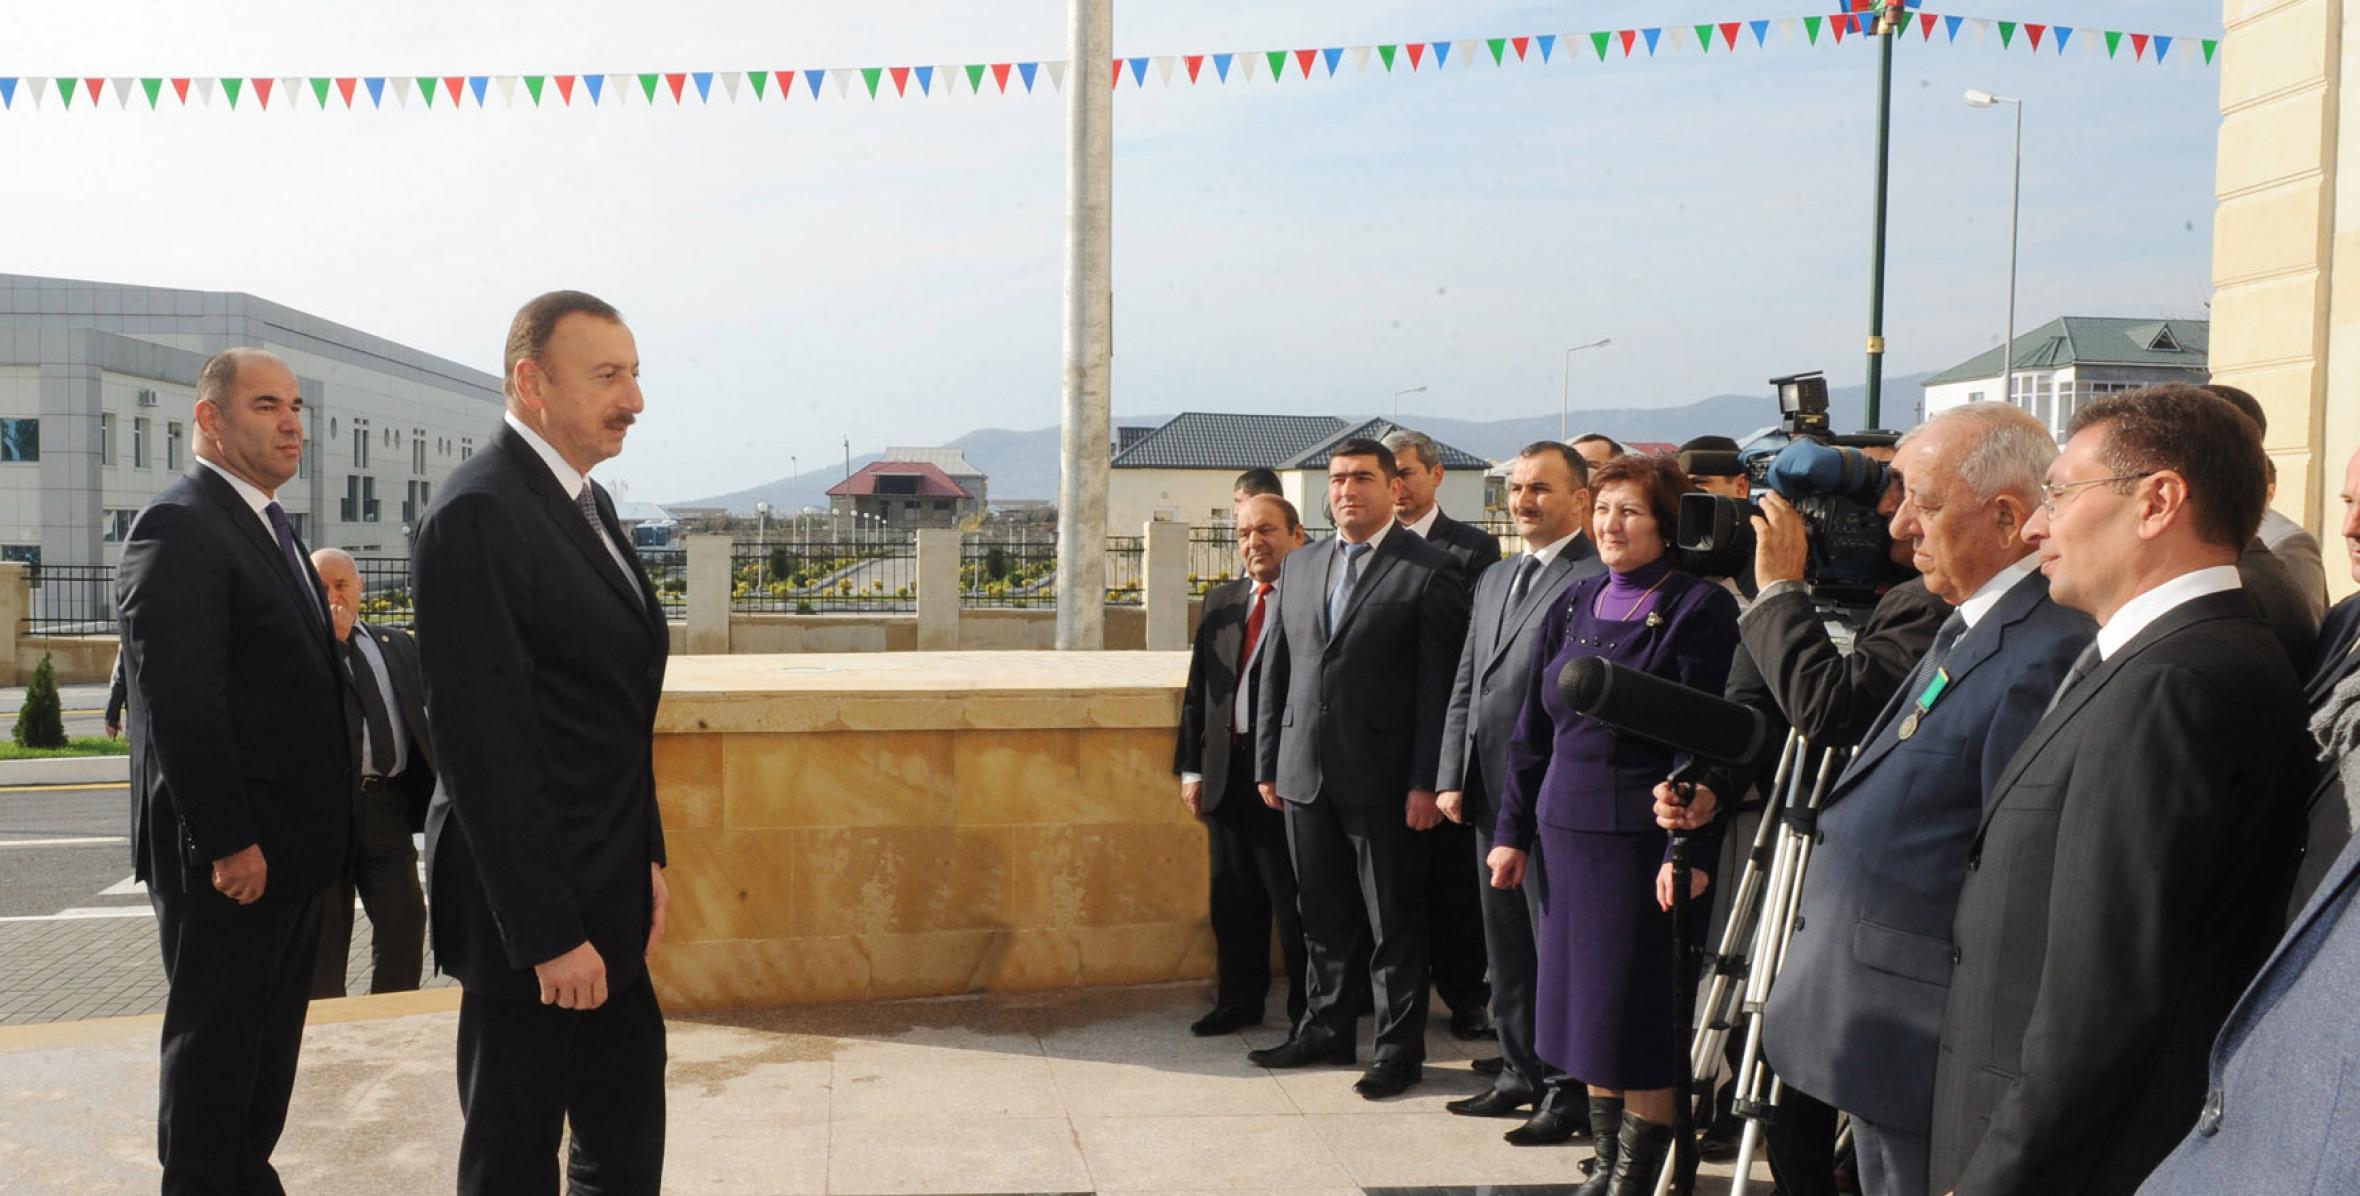 Speech by Ilham Aliyev at the opening of the Oguz city recreation and culture park